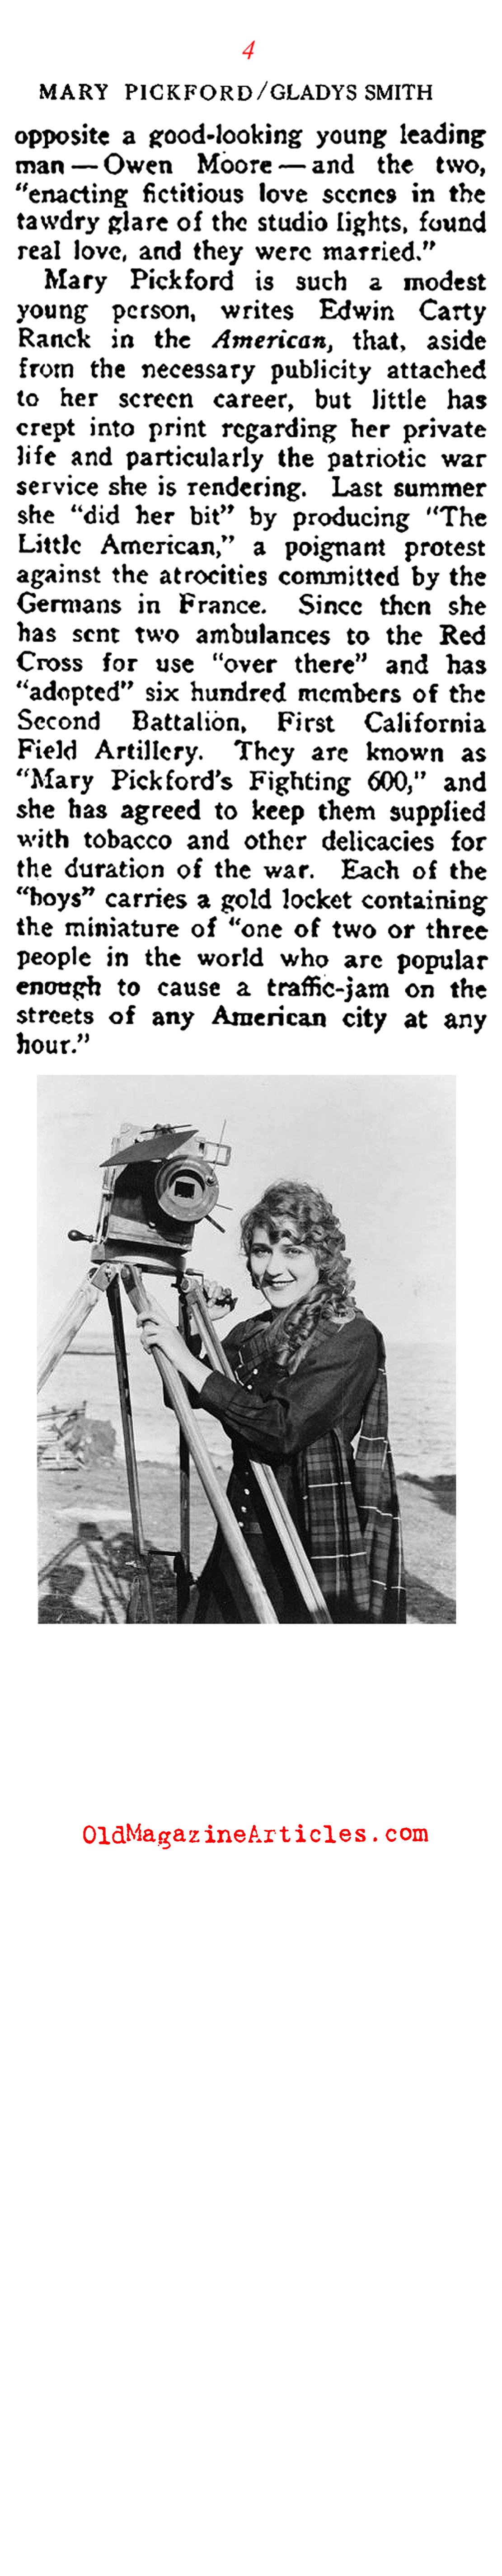 An Interview With Mary Pickford (Current Opinion, 1918)